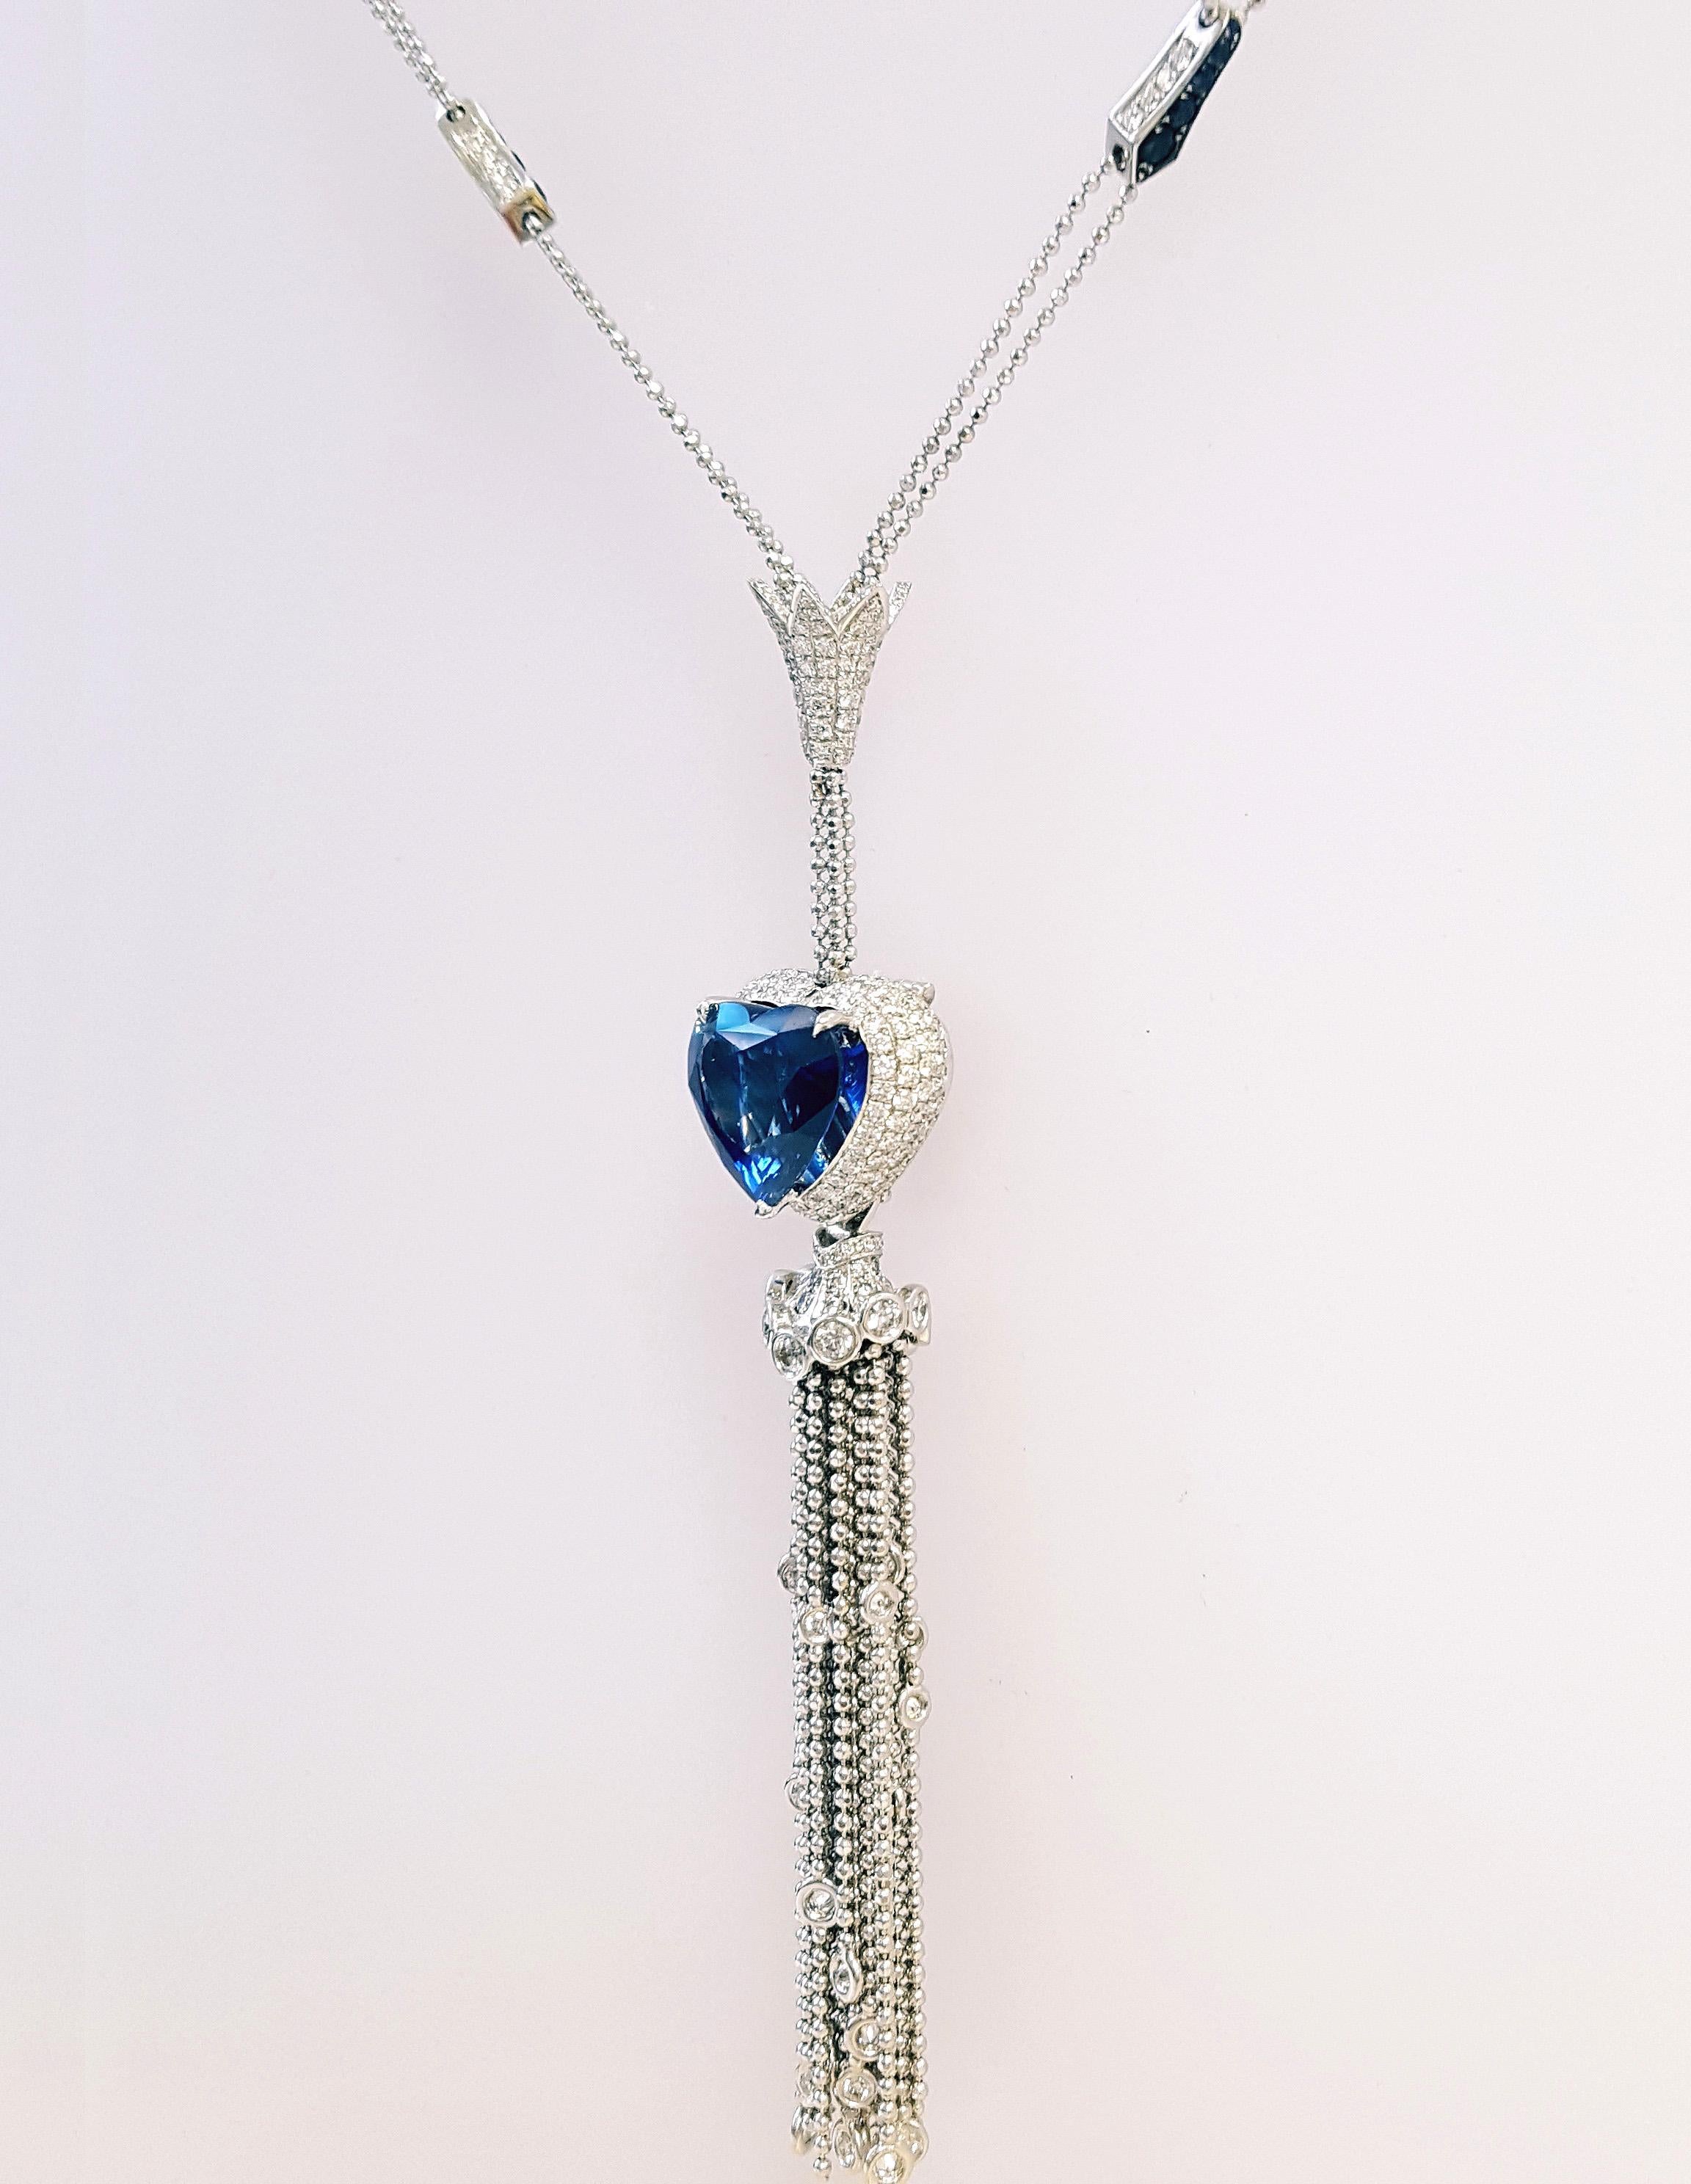 Introducing a Breathtaking Art Deco-Inspired Necklace. It features a gorgeous heart-shaped sapphire, just under 9 carats, certified by GRS as a natural gem of Madagascar origin. The center stone is elegantly encircled by a halo of dazzling diamonds,